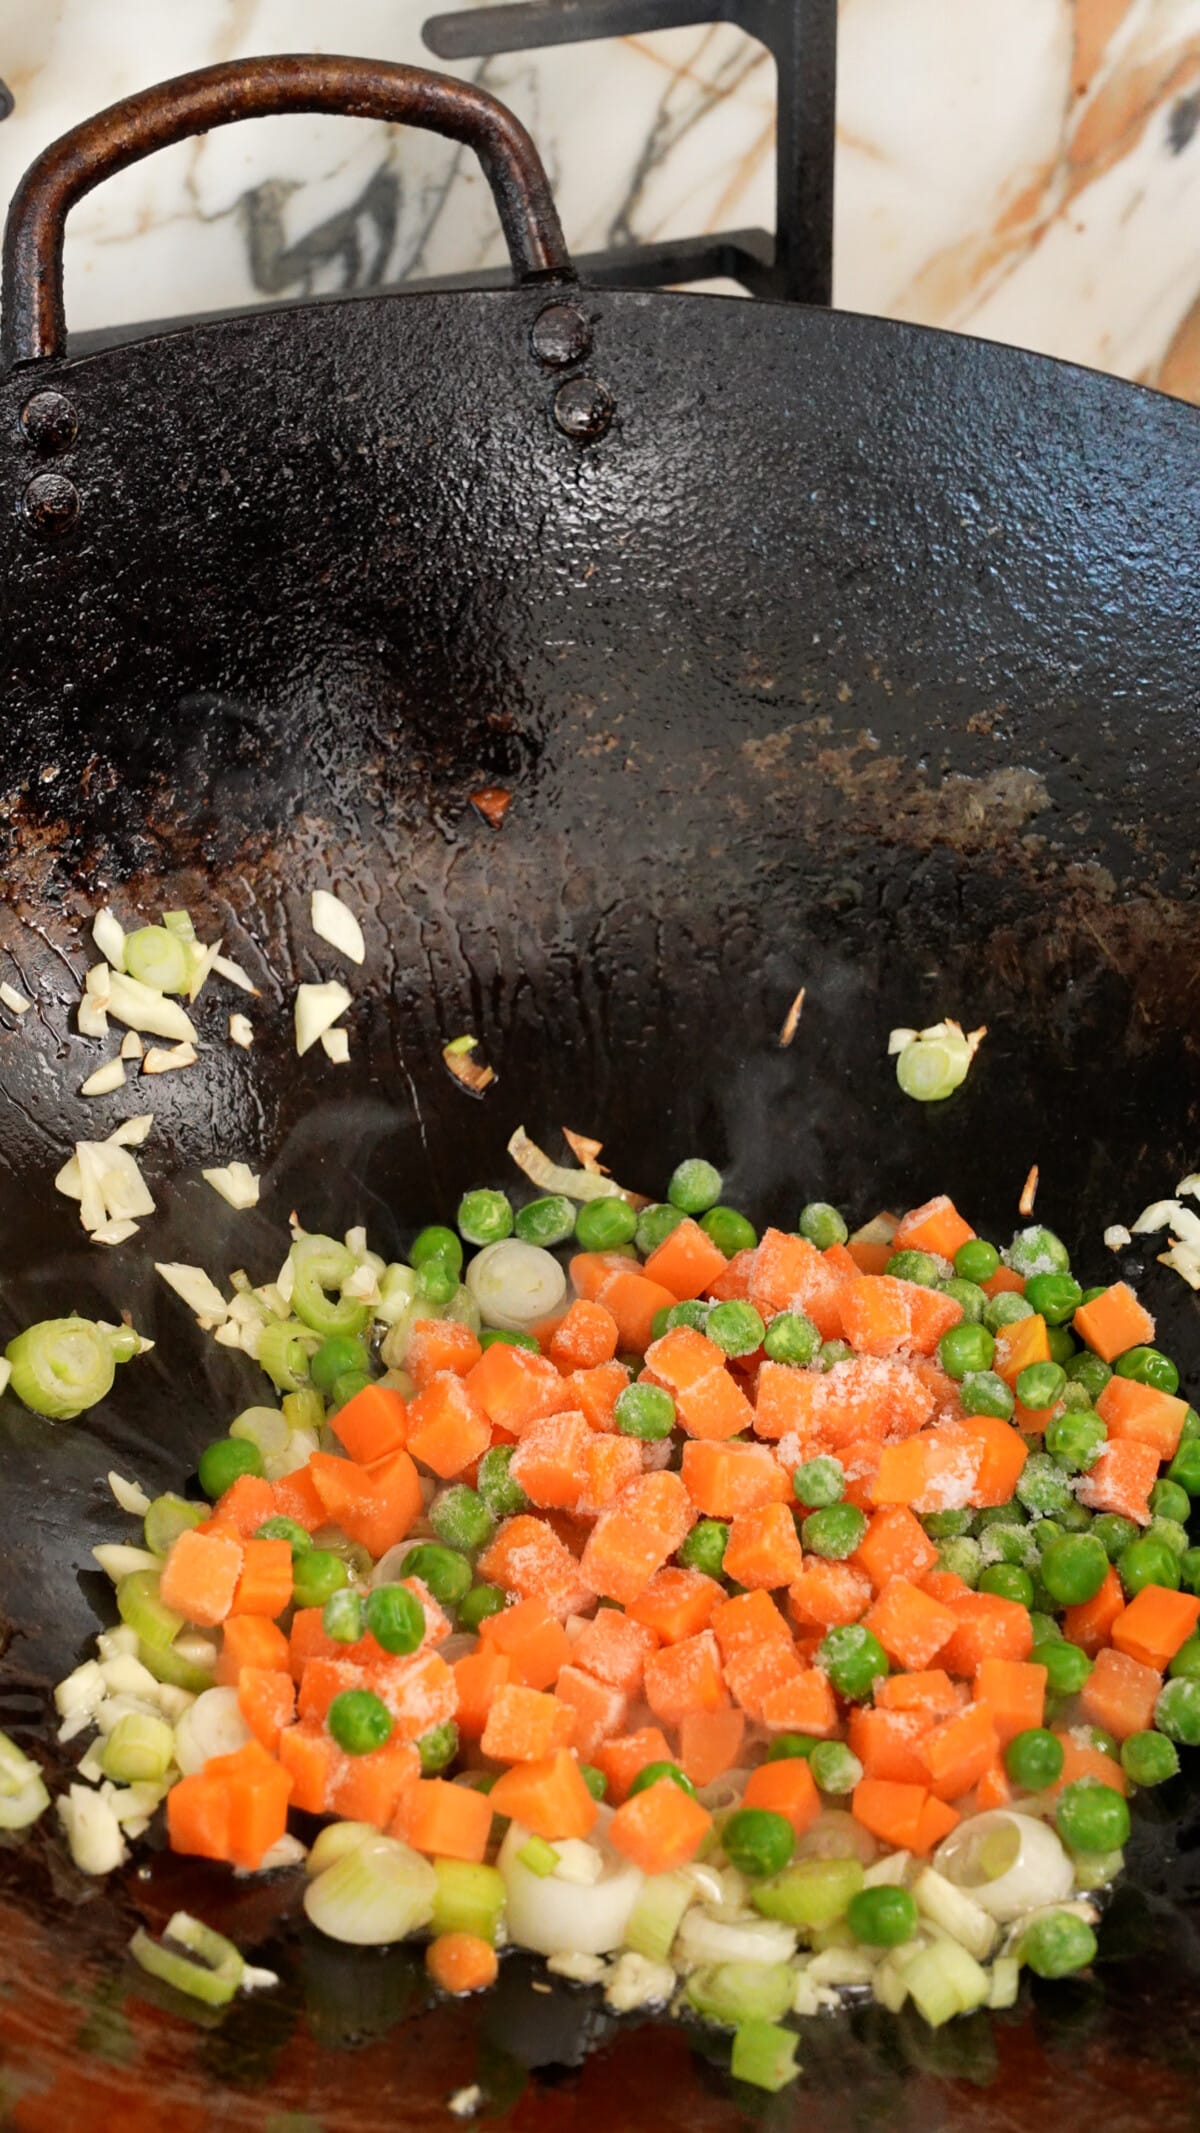 Sauteing aromatics and vegetables in a wok.